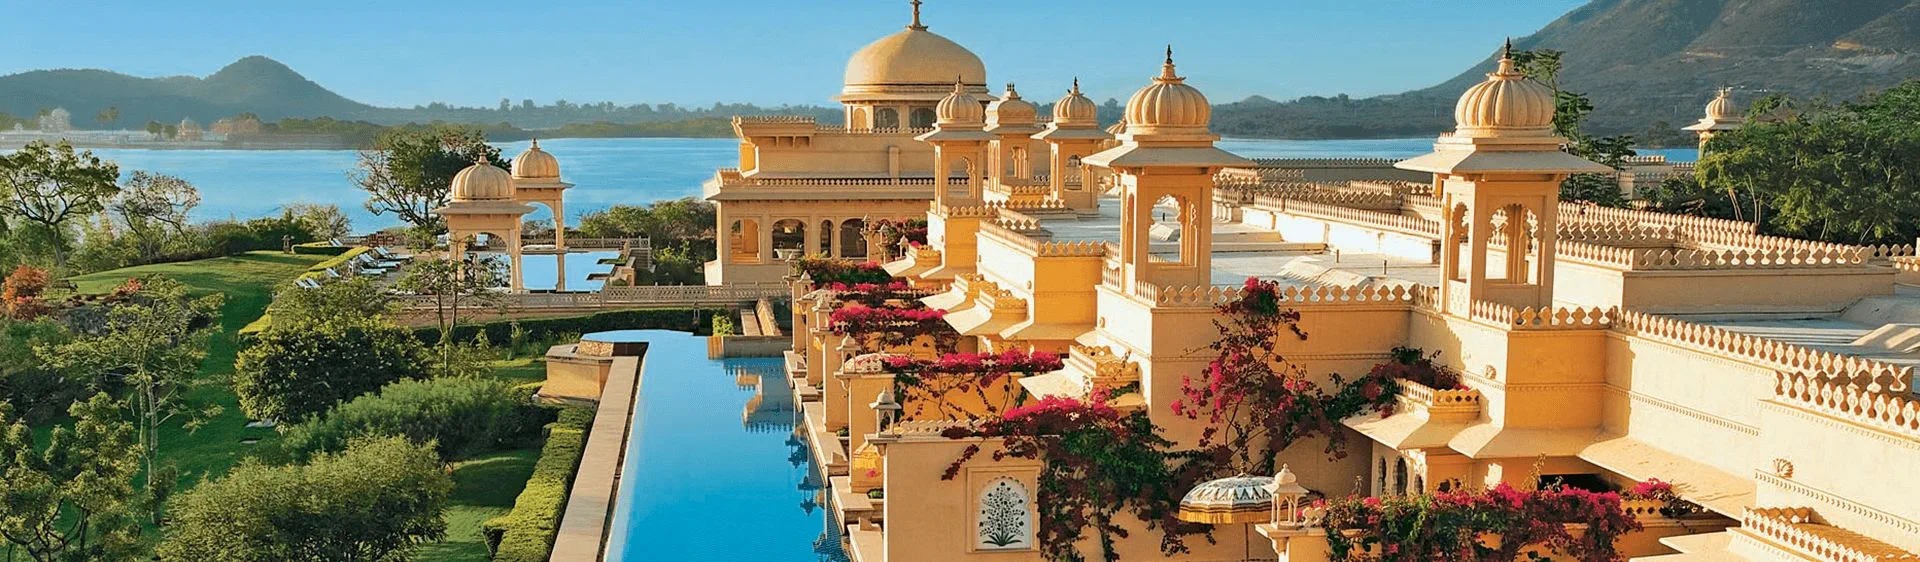 The Oberoi Udaivilas Image Gallery | udaipur 5 Star Resort Images